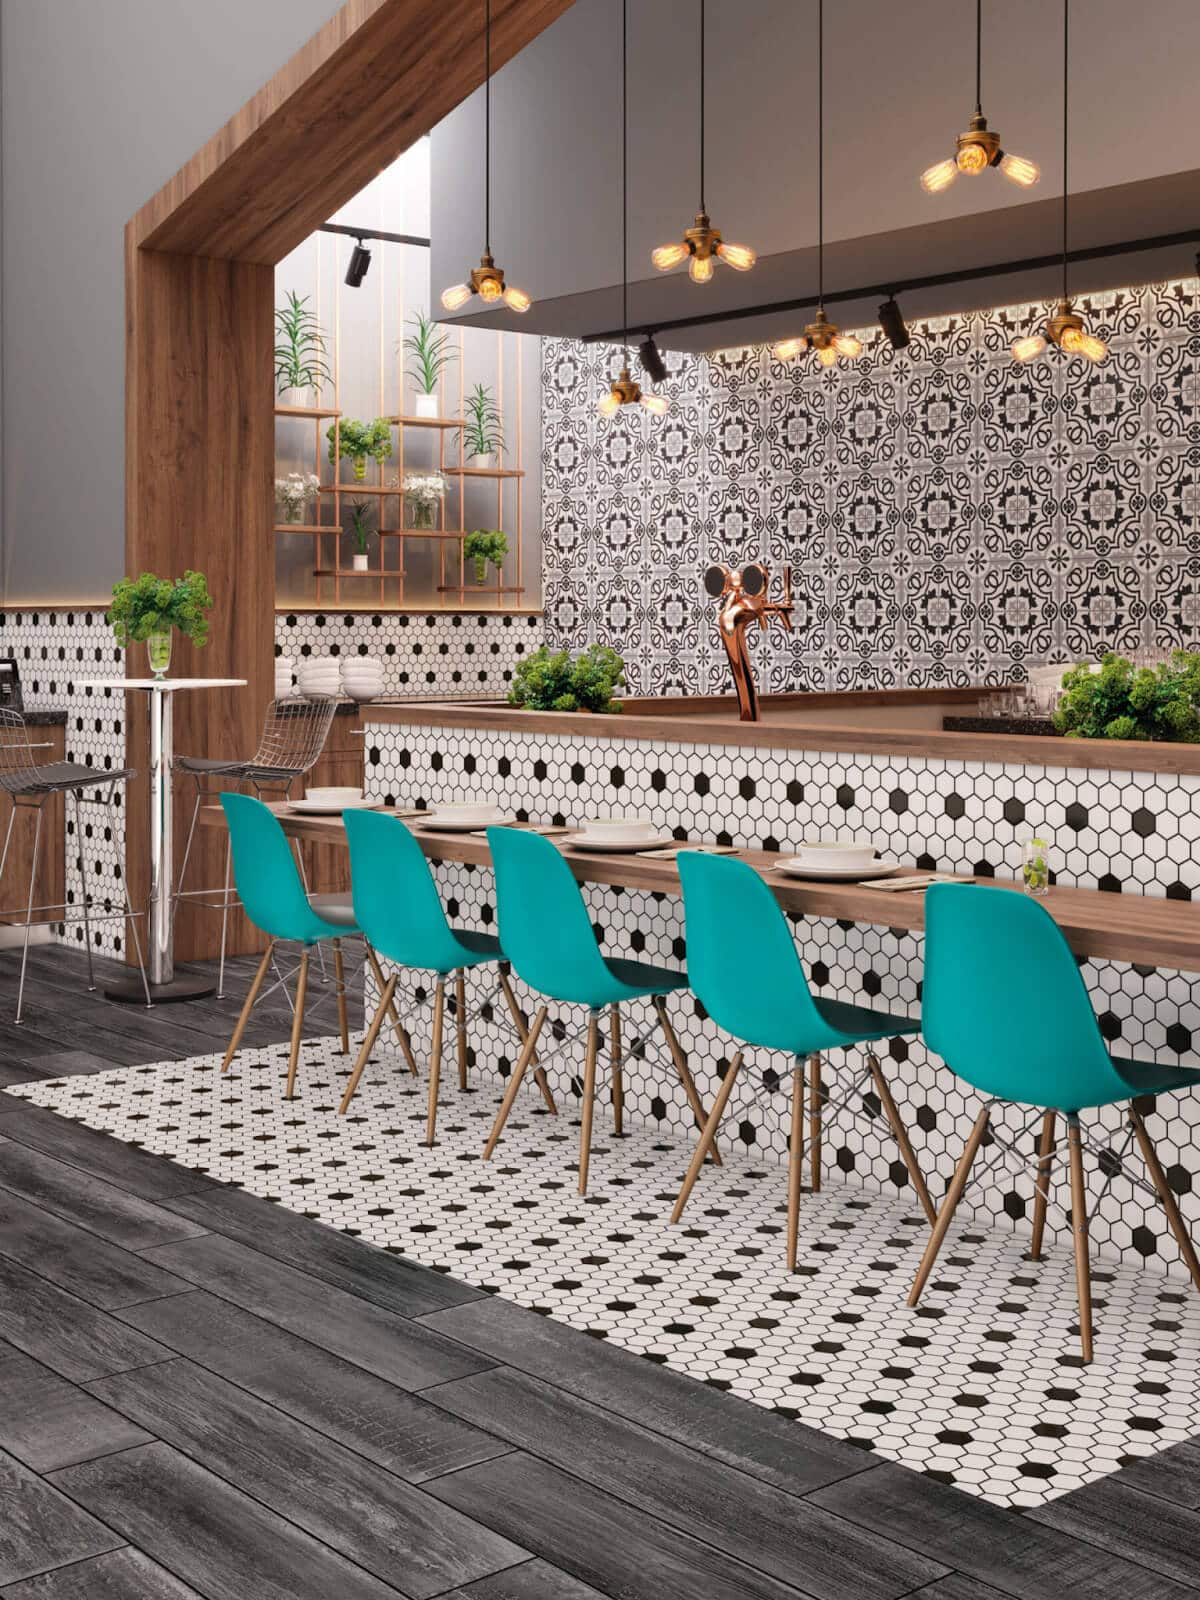 Retro black and white hexagon mosaic tile bar front and flooring